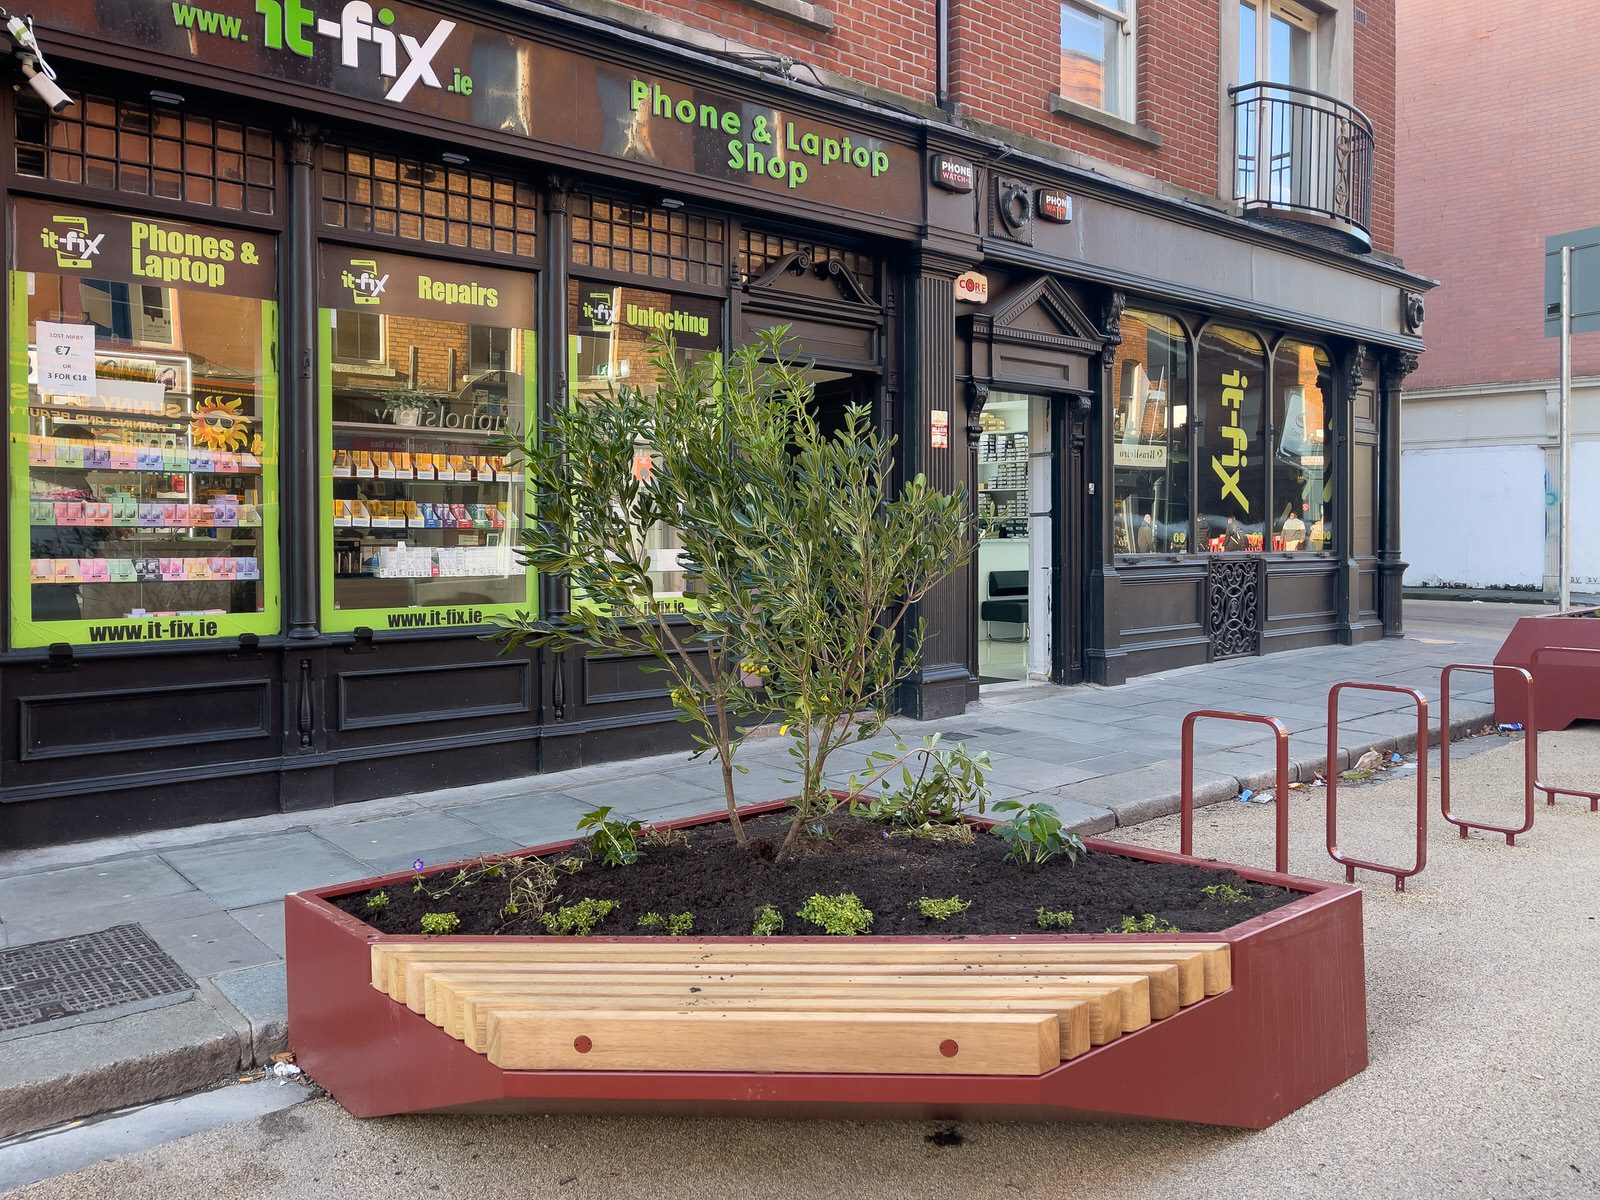 THE NEW STREET FURNITURE AND THE CHRISTMAS TREE [HAVE ARRIVED IN CAPEL STREET]-225856-1